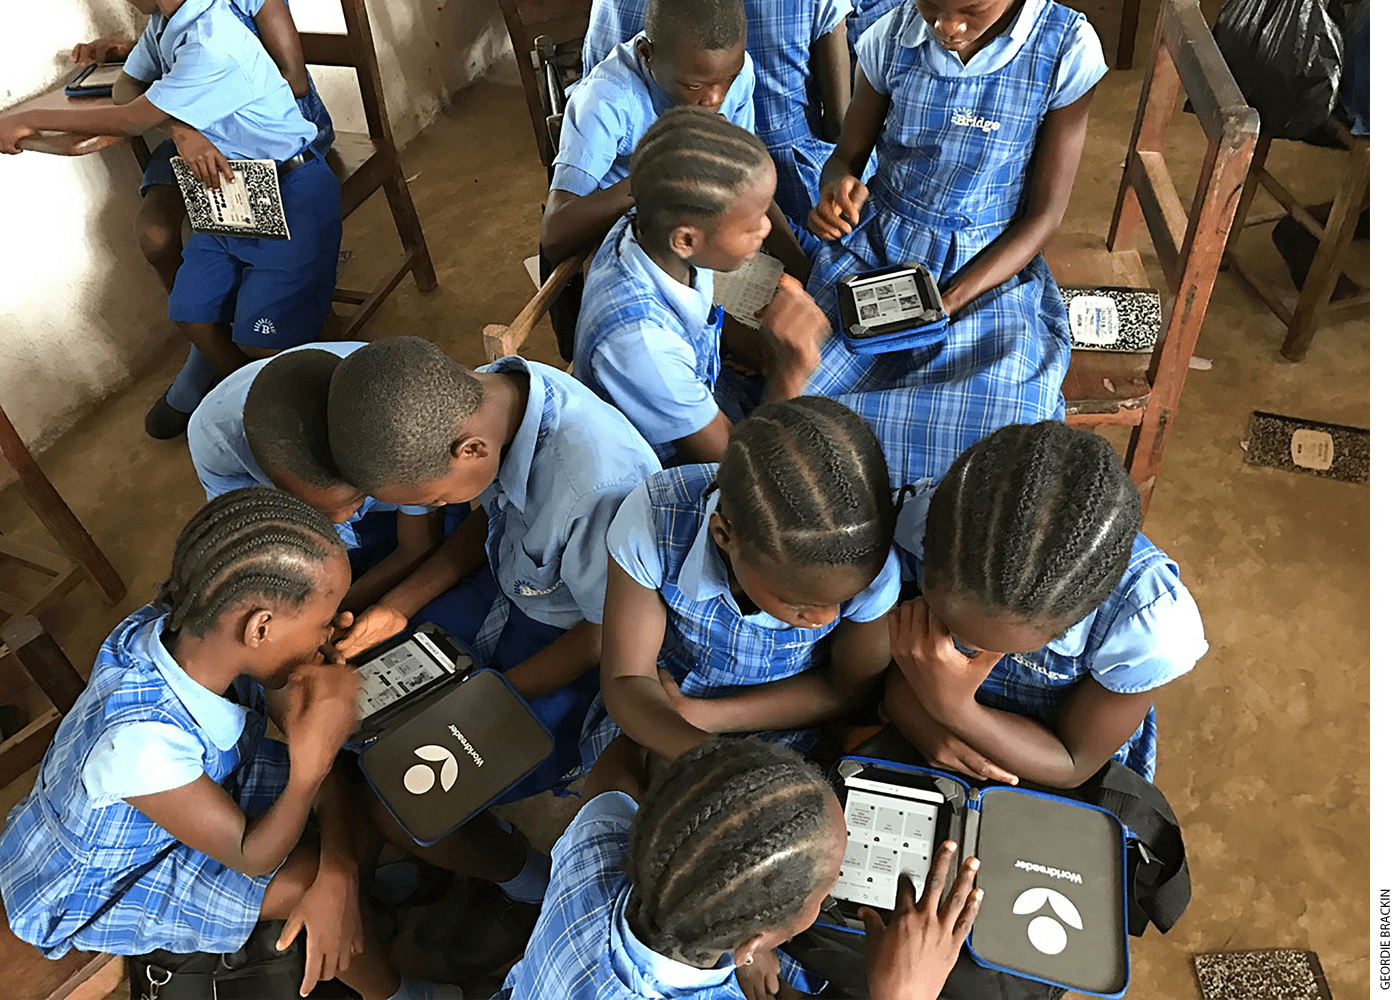 To give students access to good fiction, Bridge has experimented with the WorldReader, a tablet loaded with books and stories.